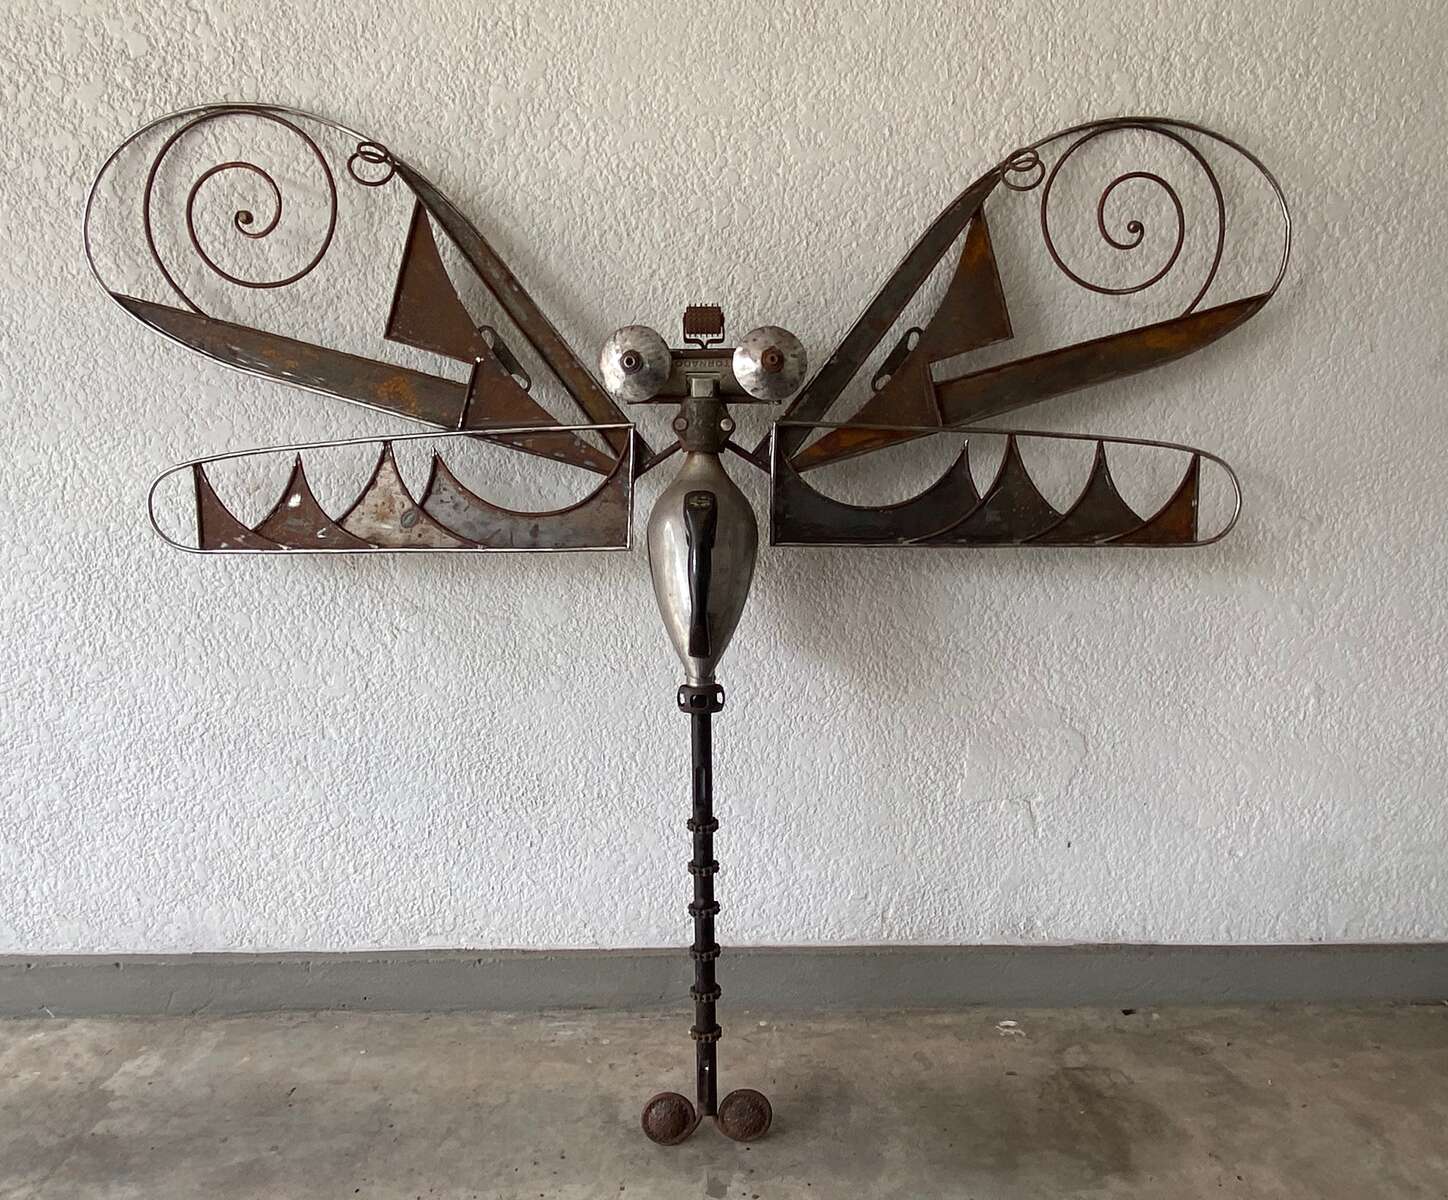 Antique TORNADO vacuum cleaner transformed into a dragonfly with found metal pieceslimited edition 1/1$6000 USD 